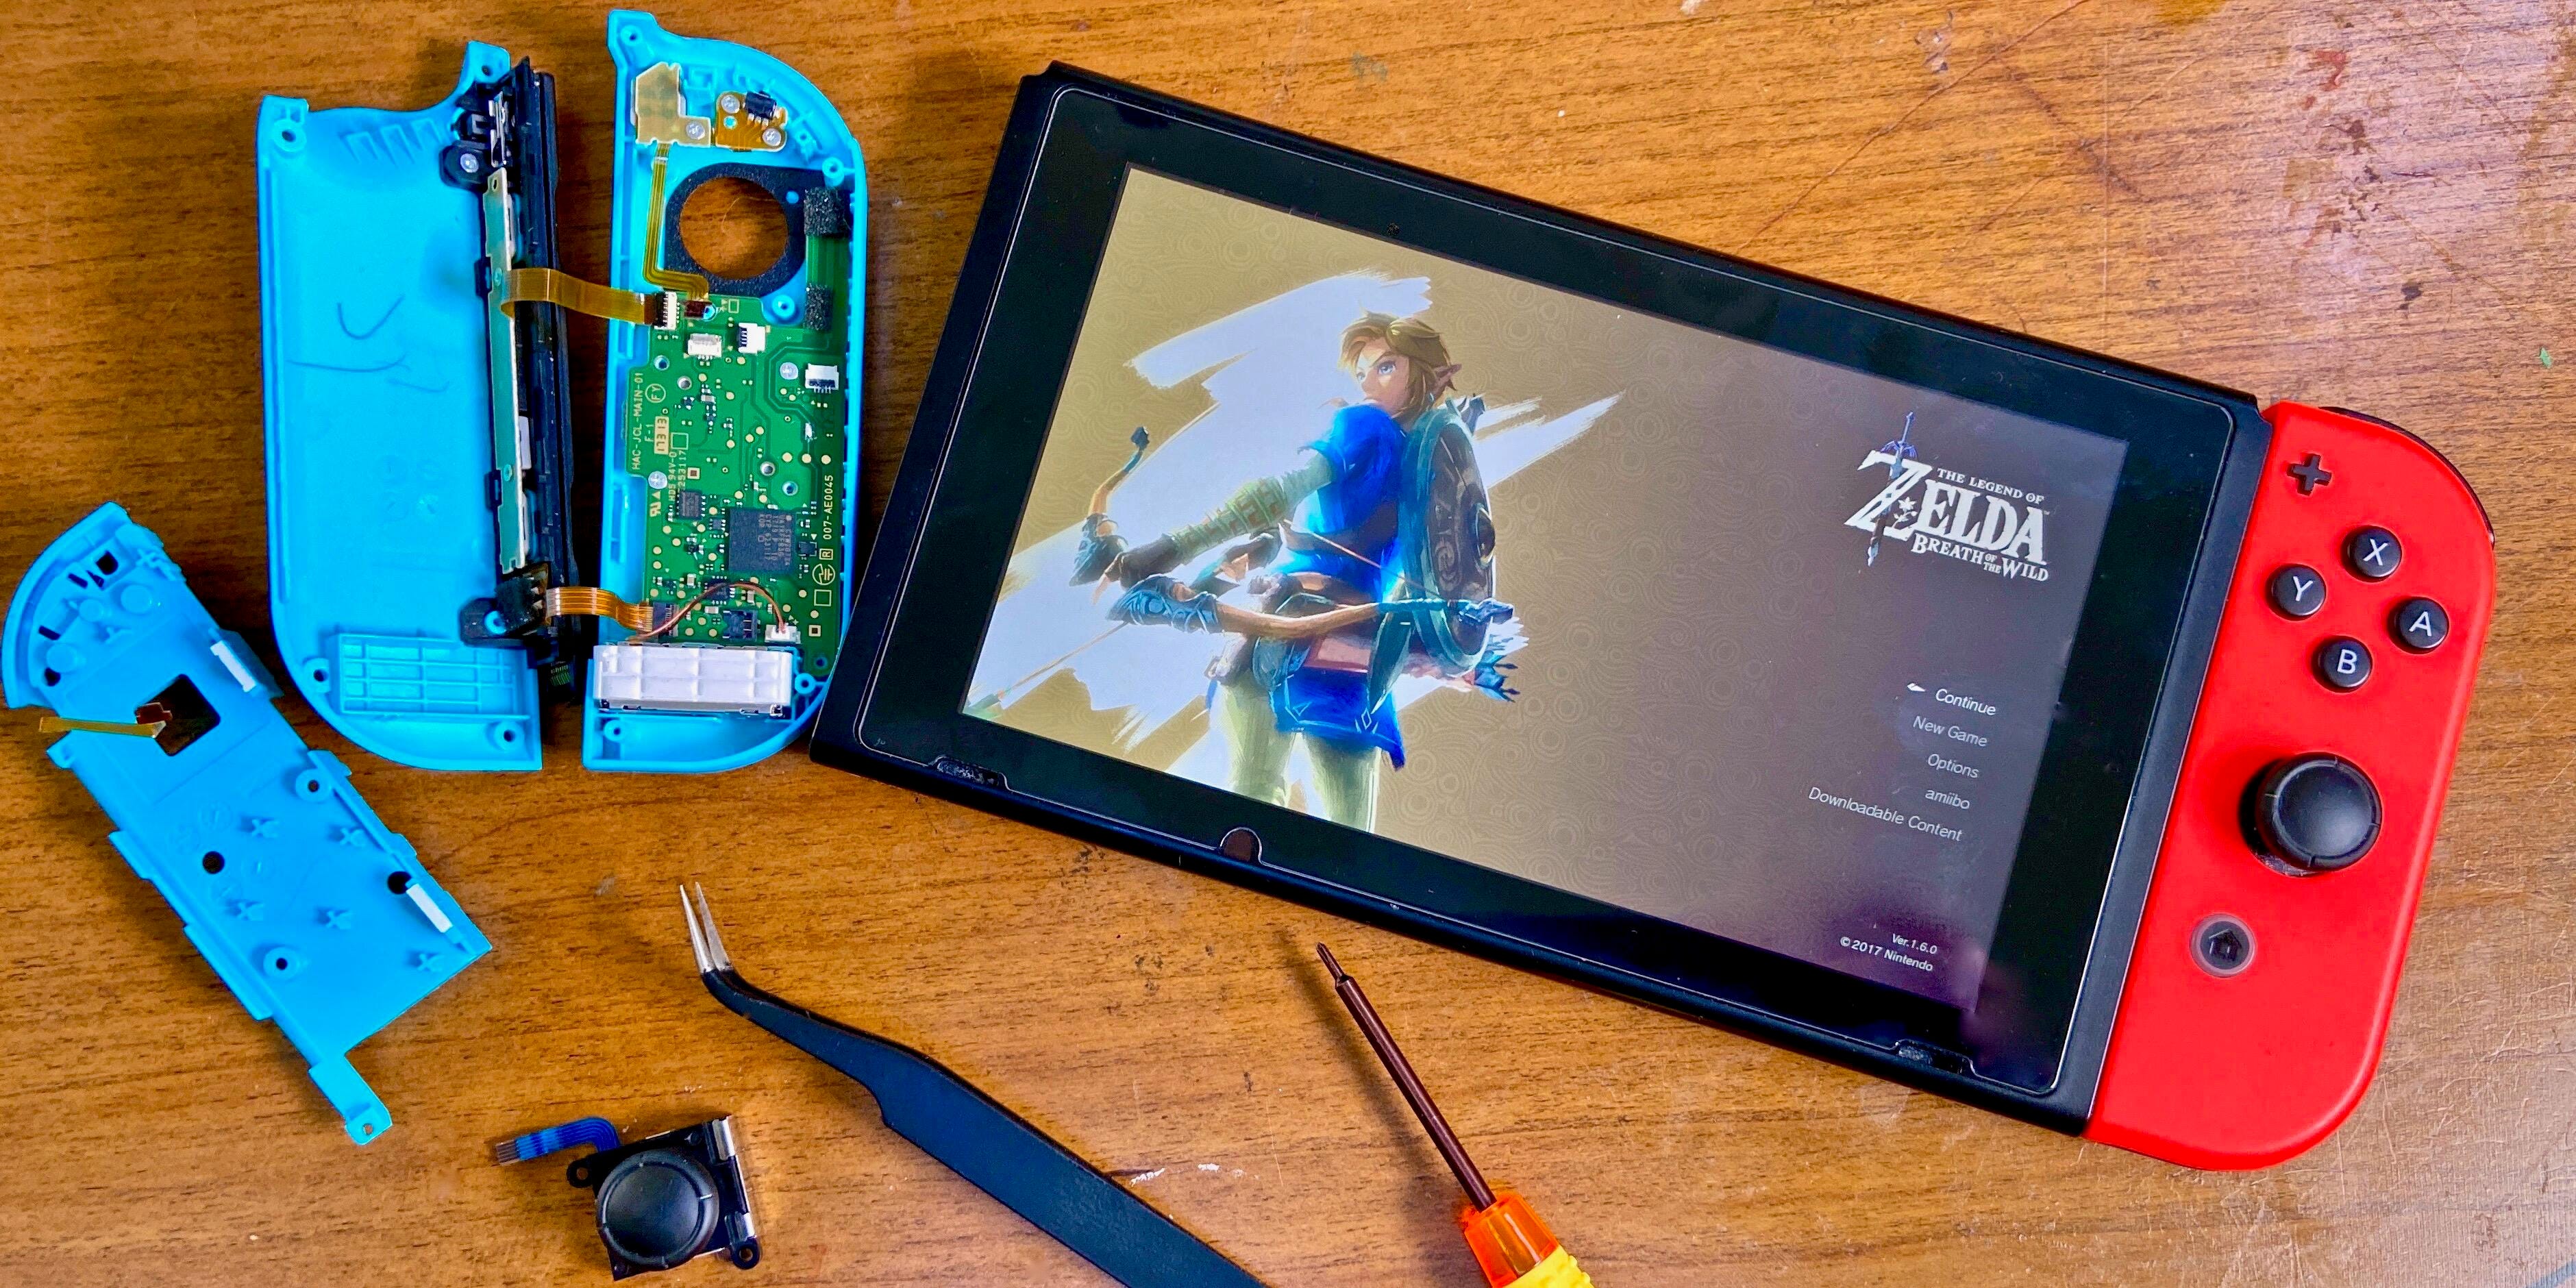 Nintendo 5 ways to fix -- with or without tools - CNET